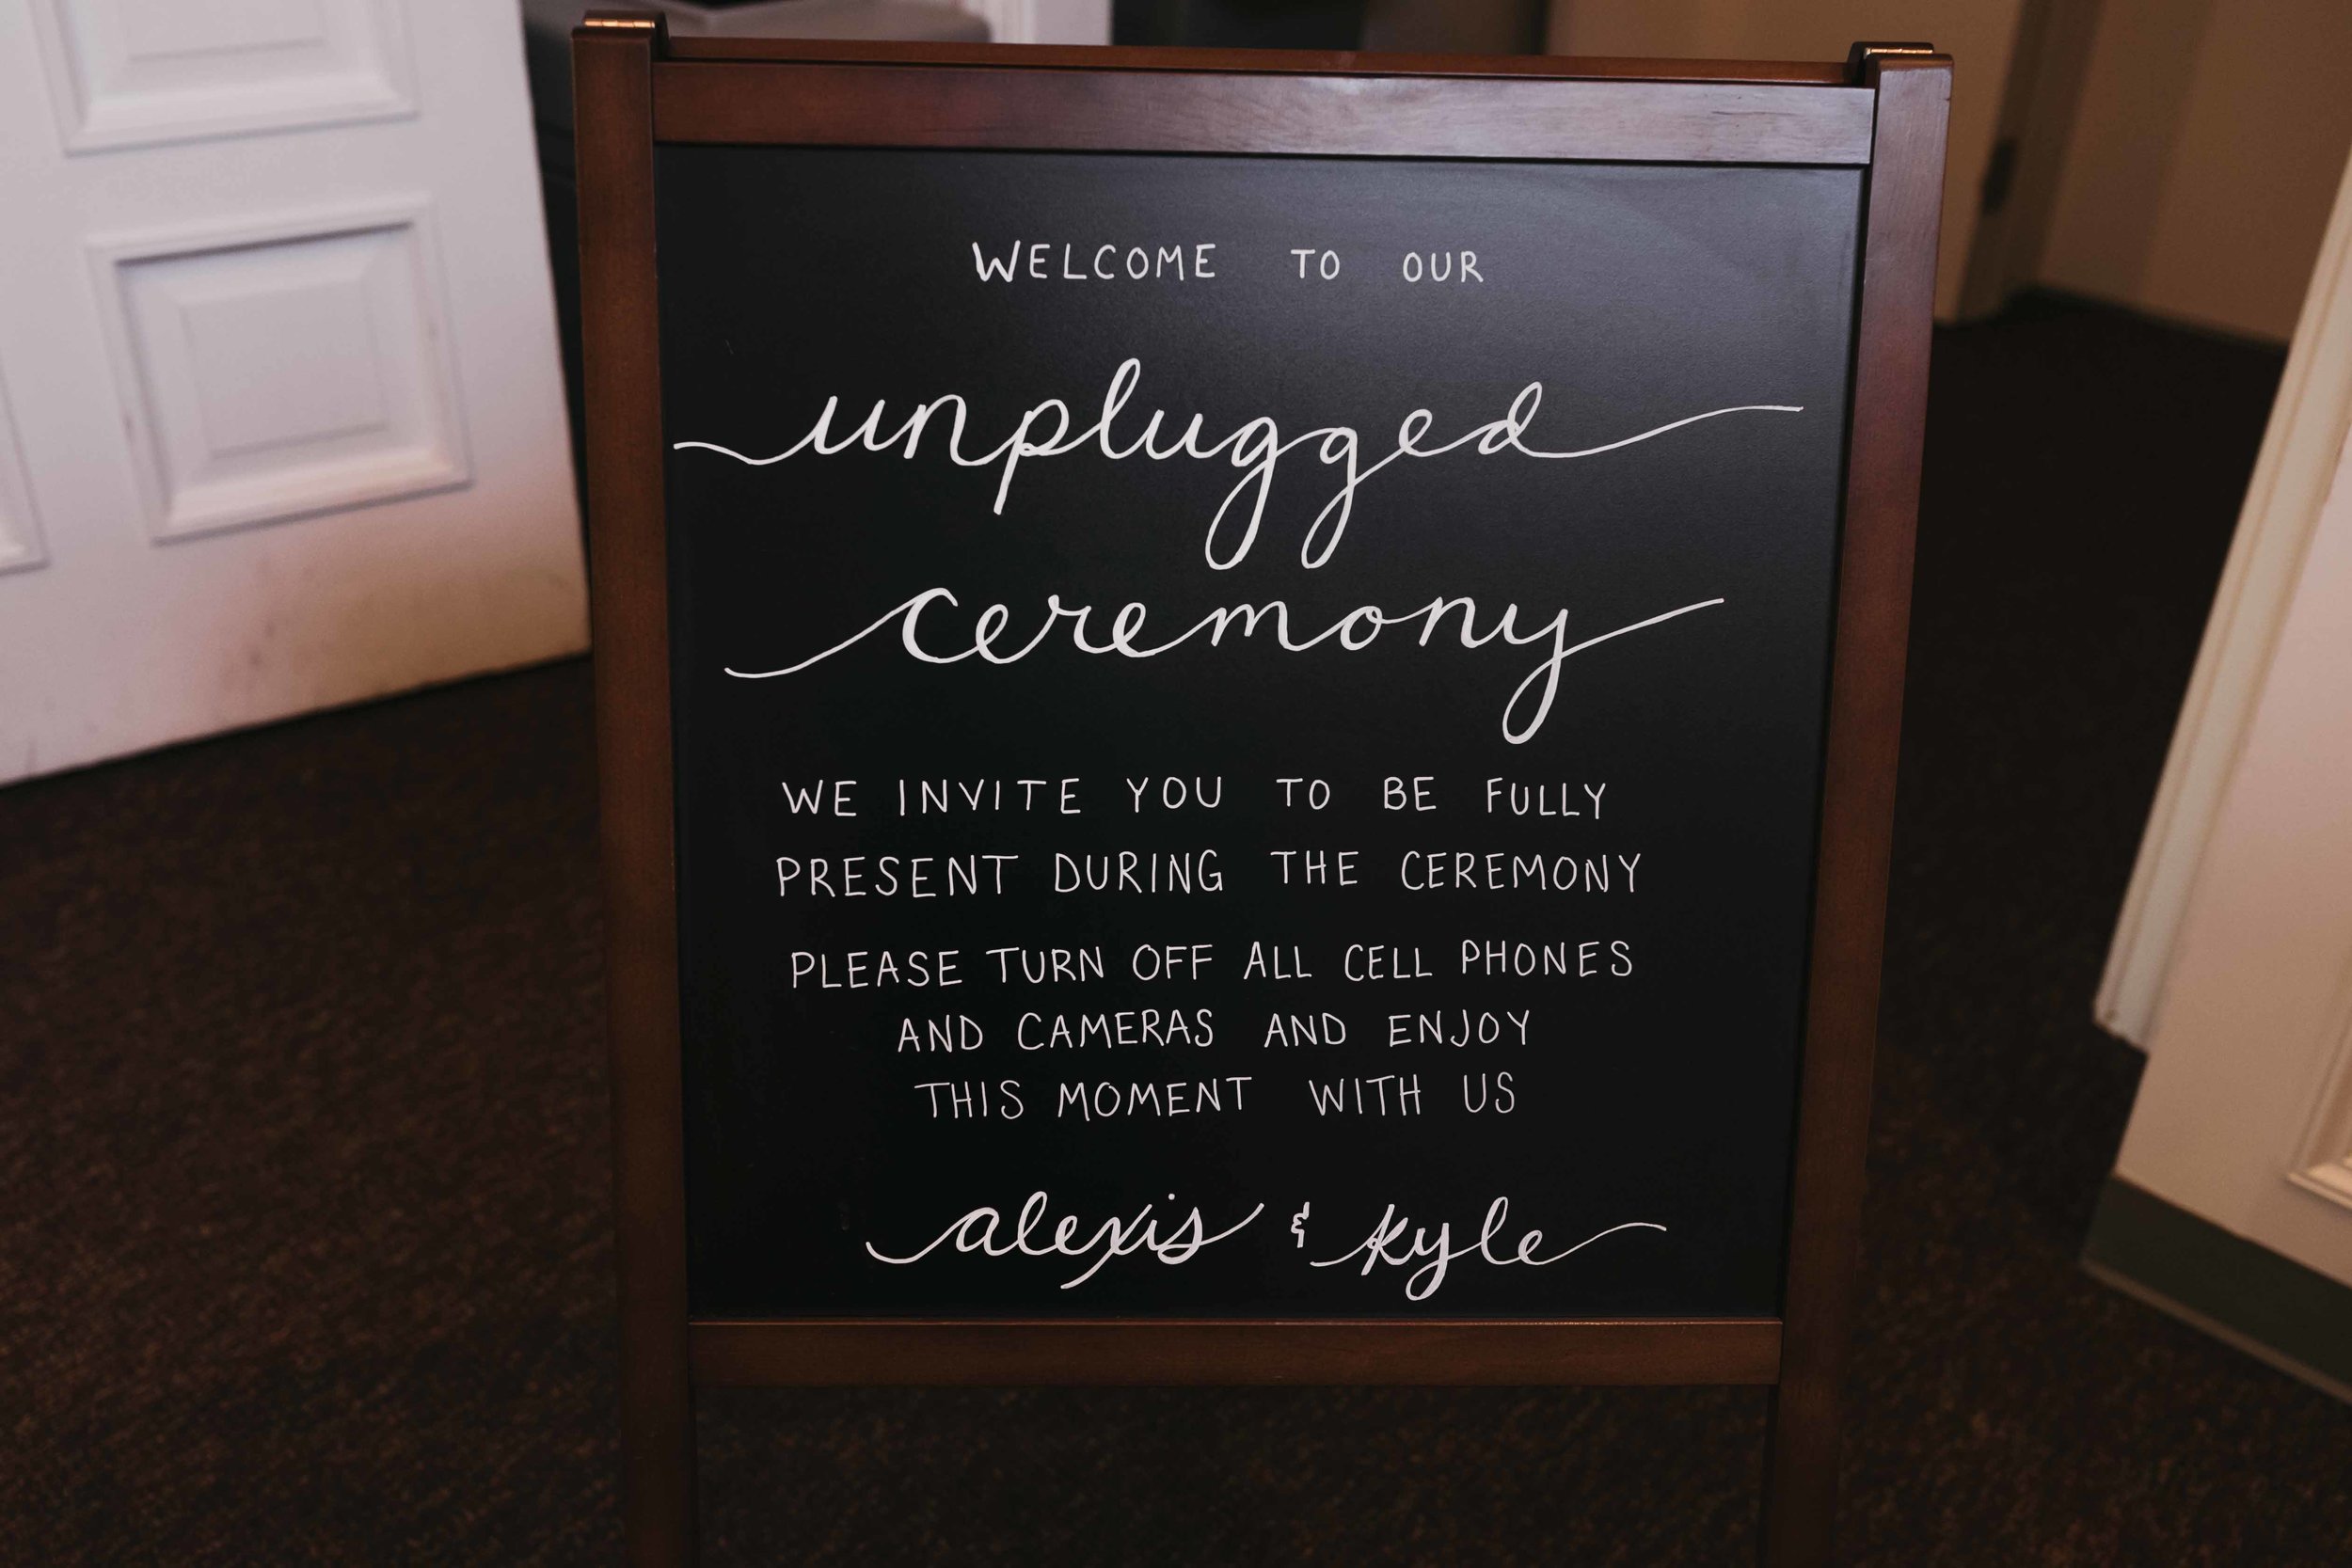 Please Have an Unplugged Ceremony